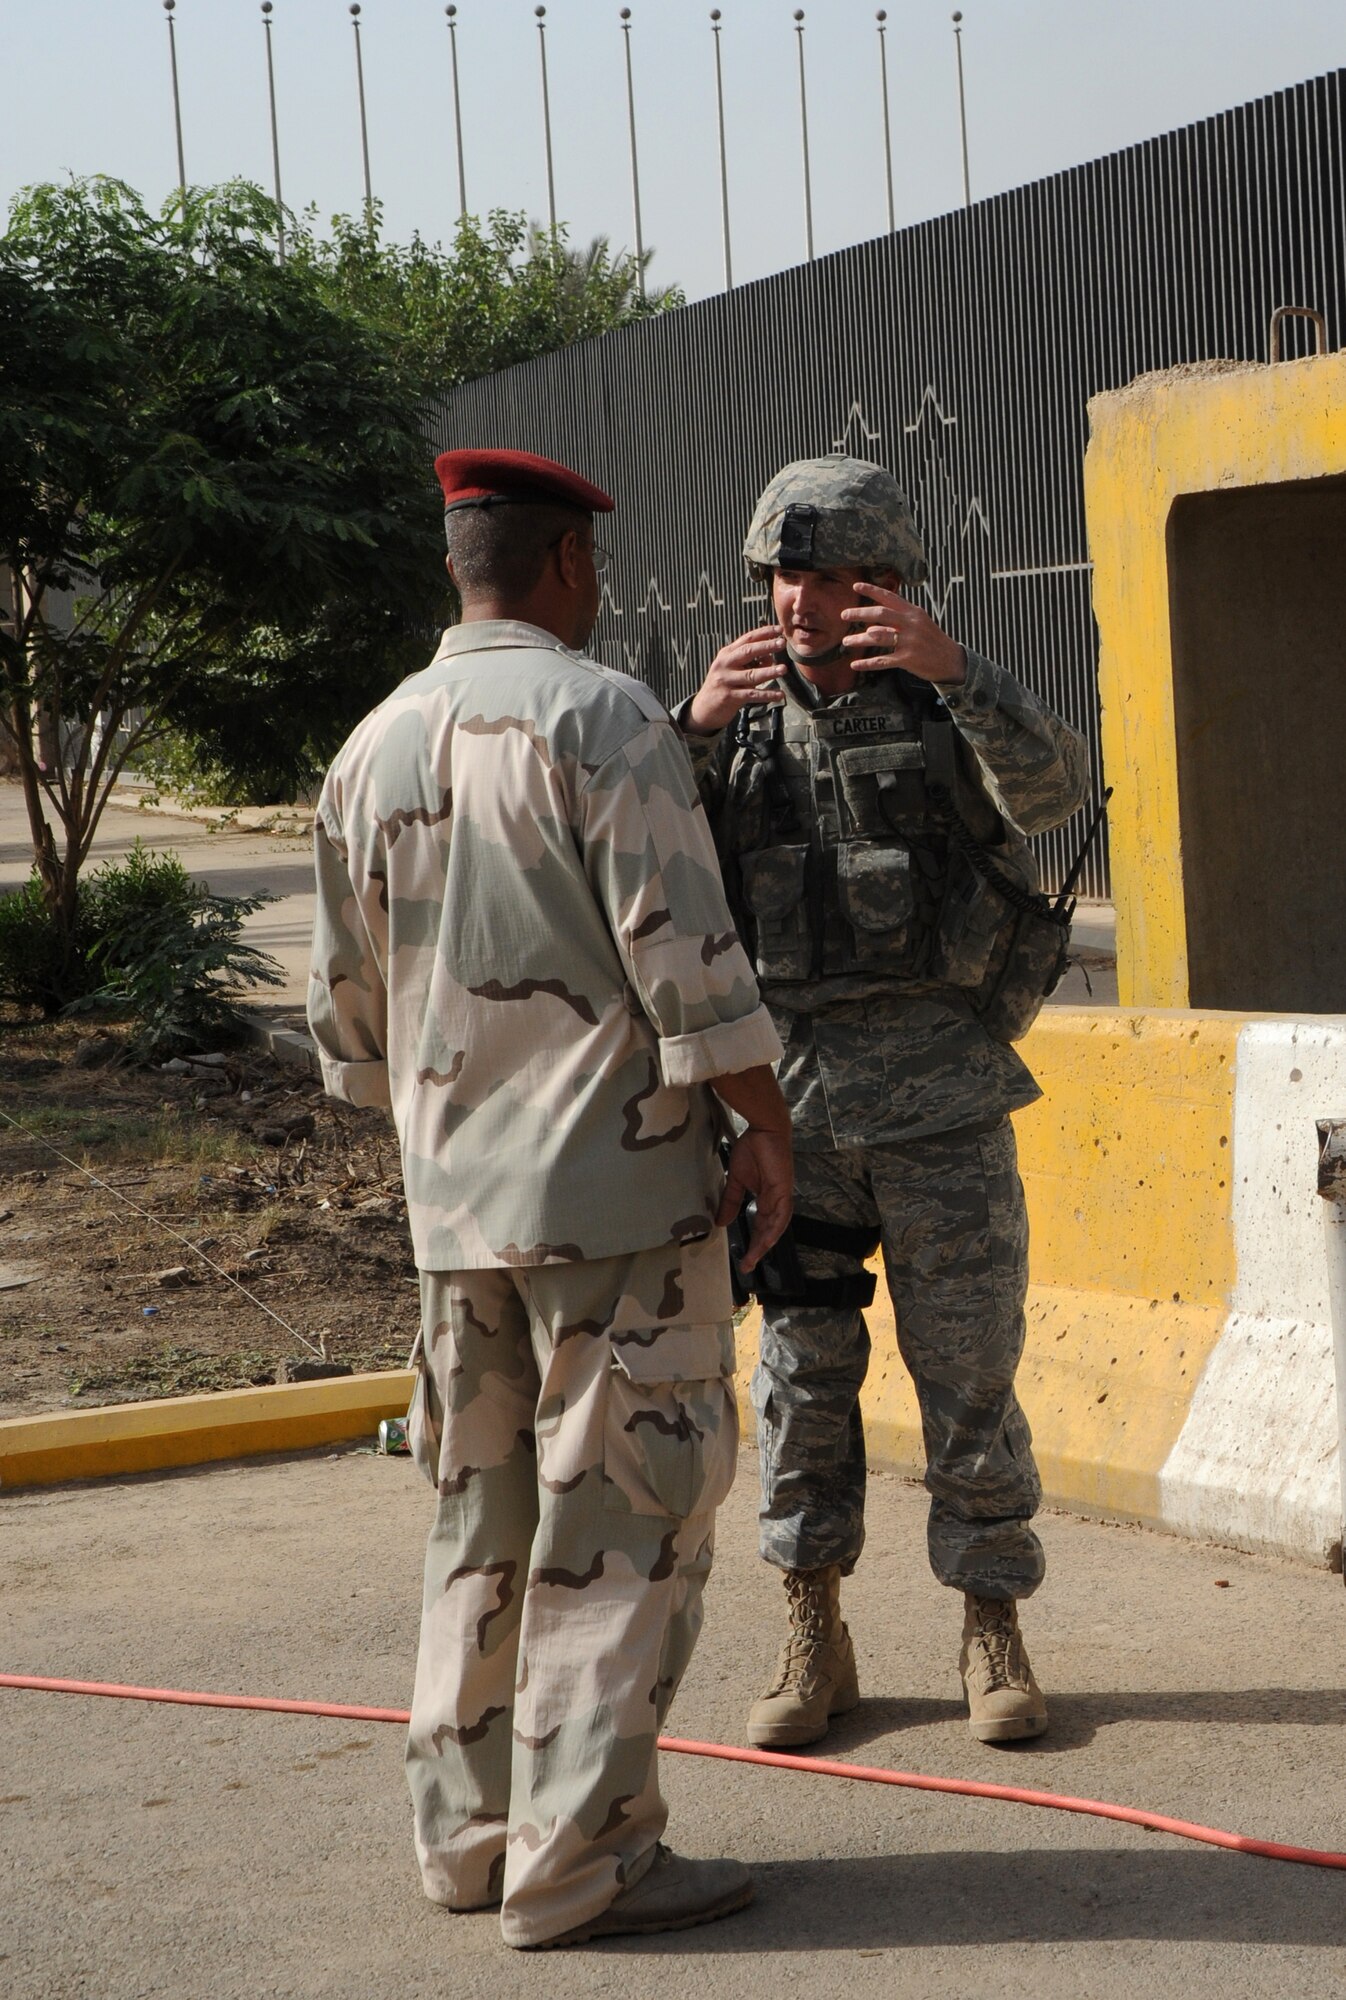 INTERNATIONAL ZONE,Baghdad, Iraq -- Tech. Sgt. John Carter, 732nd Expeditionary Security Forces Squadron, Detachment 4, talks with an Iraqi army soldier while responding to a call about an indirect fire point of impact on an Iraqi forward operating base within the International Zone May 28. (U.S. Air Force photo/Tech. Sgt. Amanda Callahan)